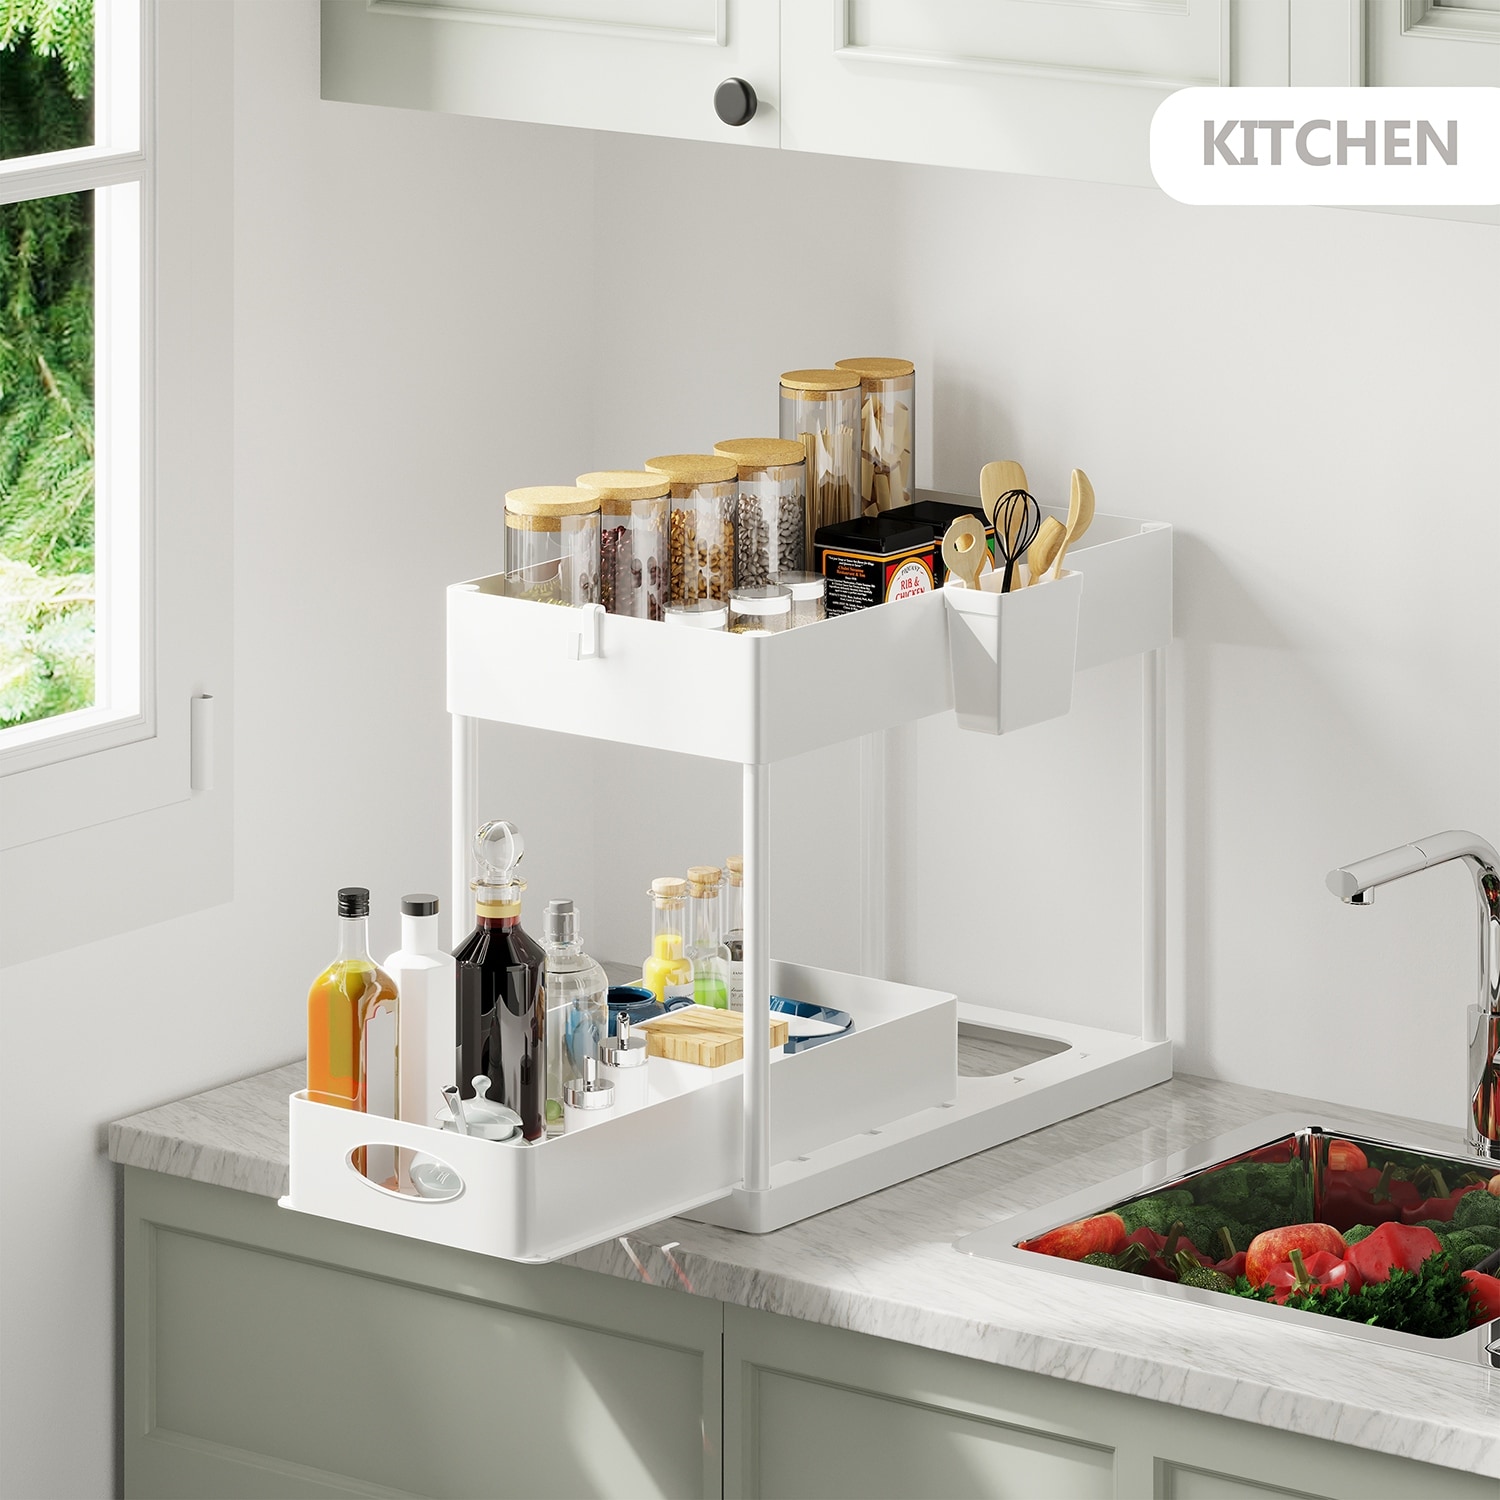 https://ak1.ostkcdn.com/images/products/is/images/direct/ca5c3de644d43ac70e4196b5bb7ca6c82675cb52/StorageBud-2-Tier-Under-Kitchen-Sink-Organizer-with-Sliding-Drawer-Bathroom-Cabinet-Organizer-with-Utility-Hooks-and-Side-Caddy.jpg